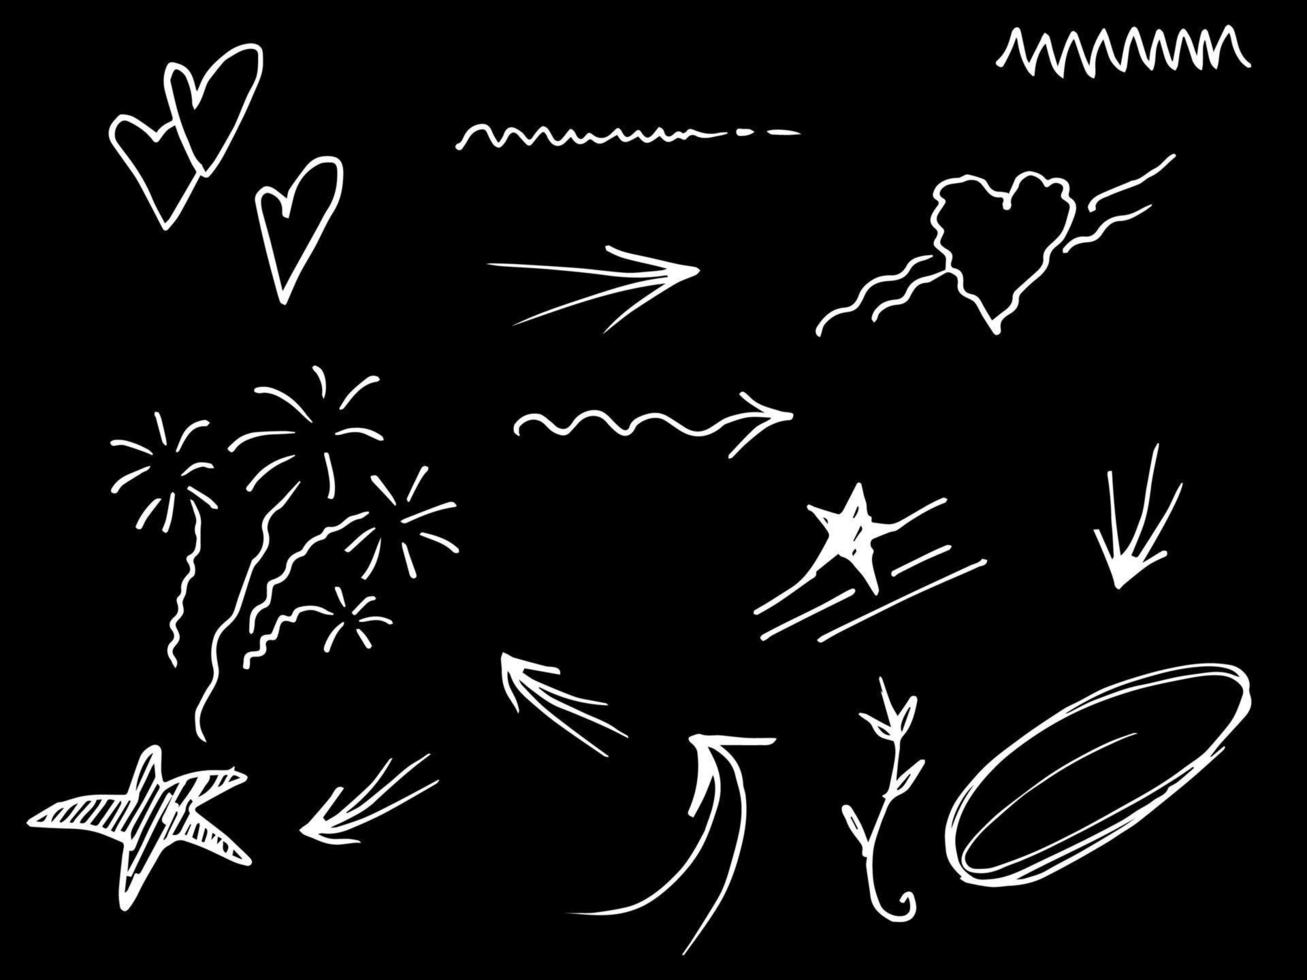 Doodle elements for concept design on set. isolated on black background. Infographic elements. Emphasis, curly swishes, swoops, swirl, arrow. vector illustration